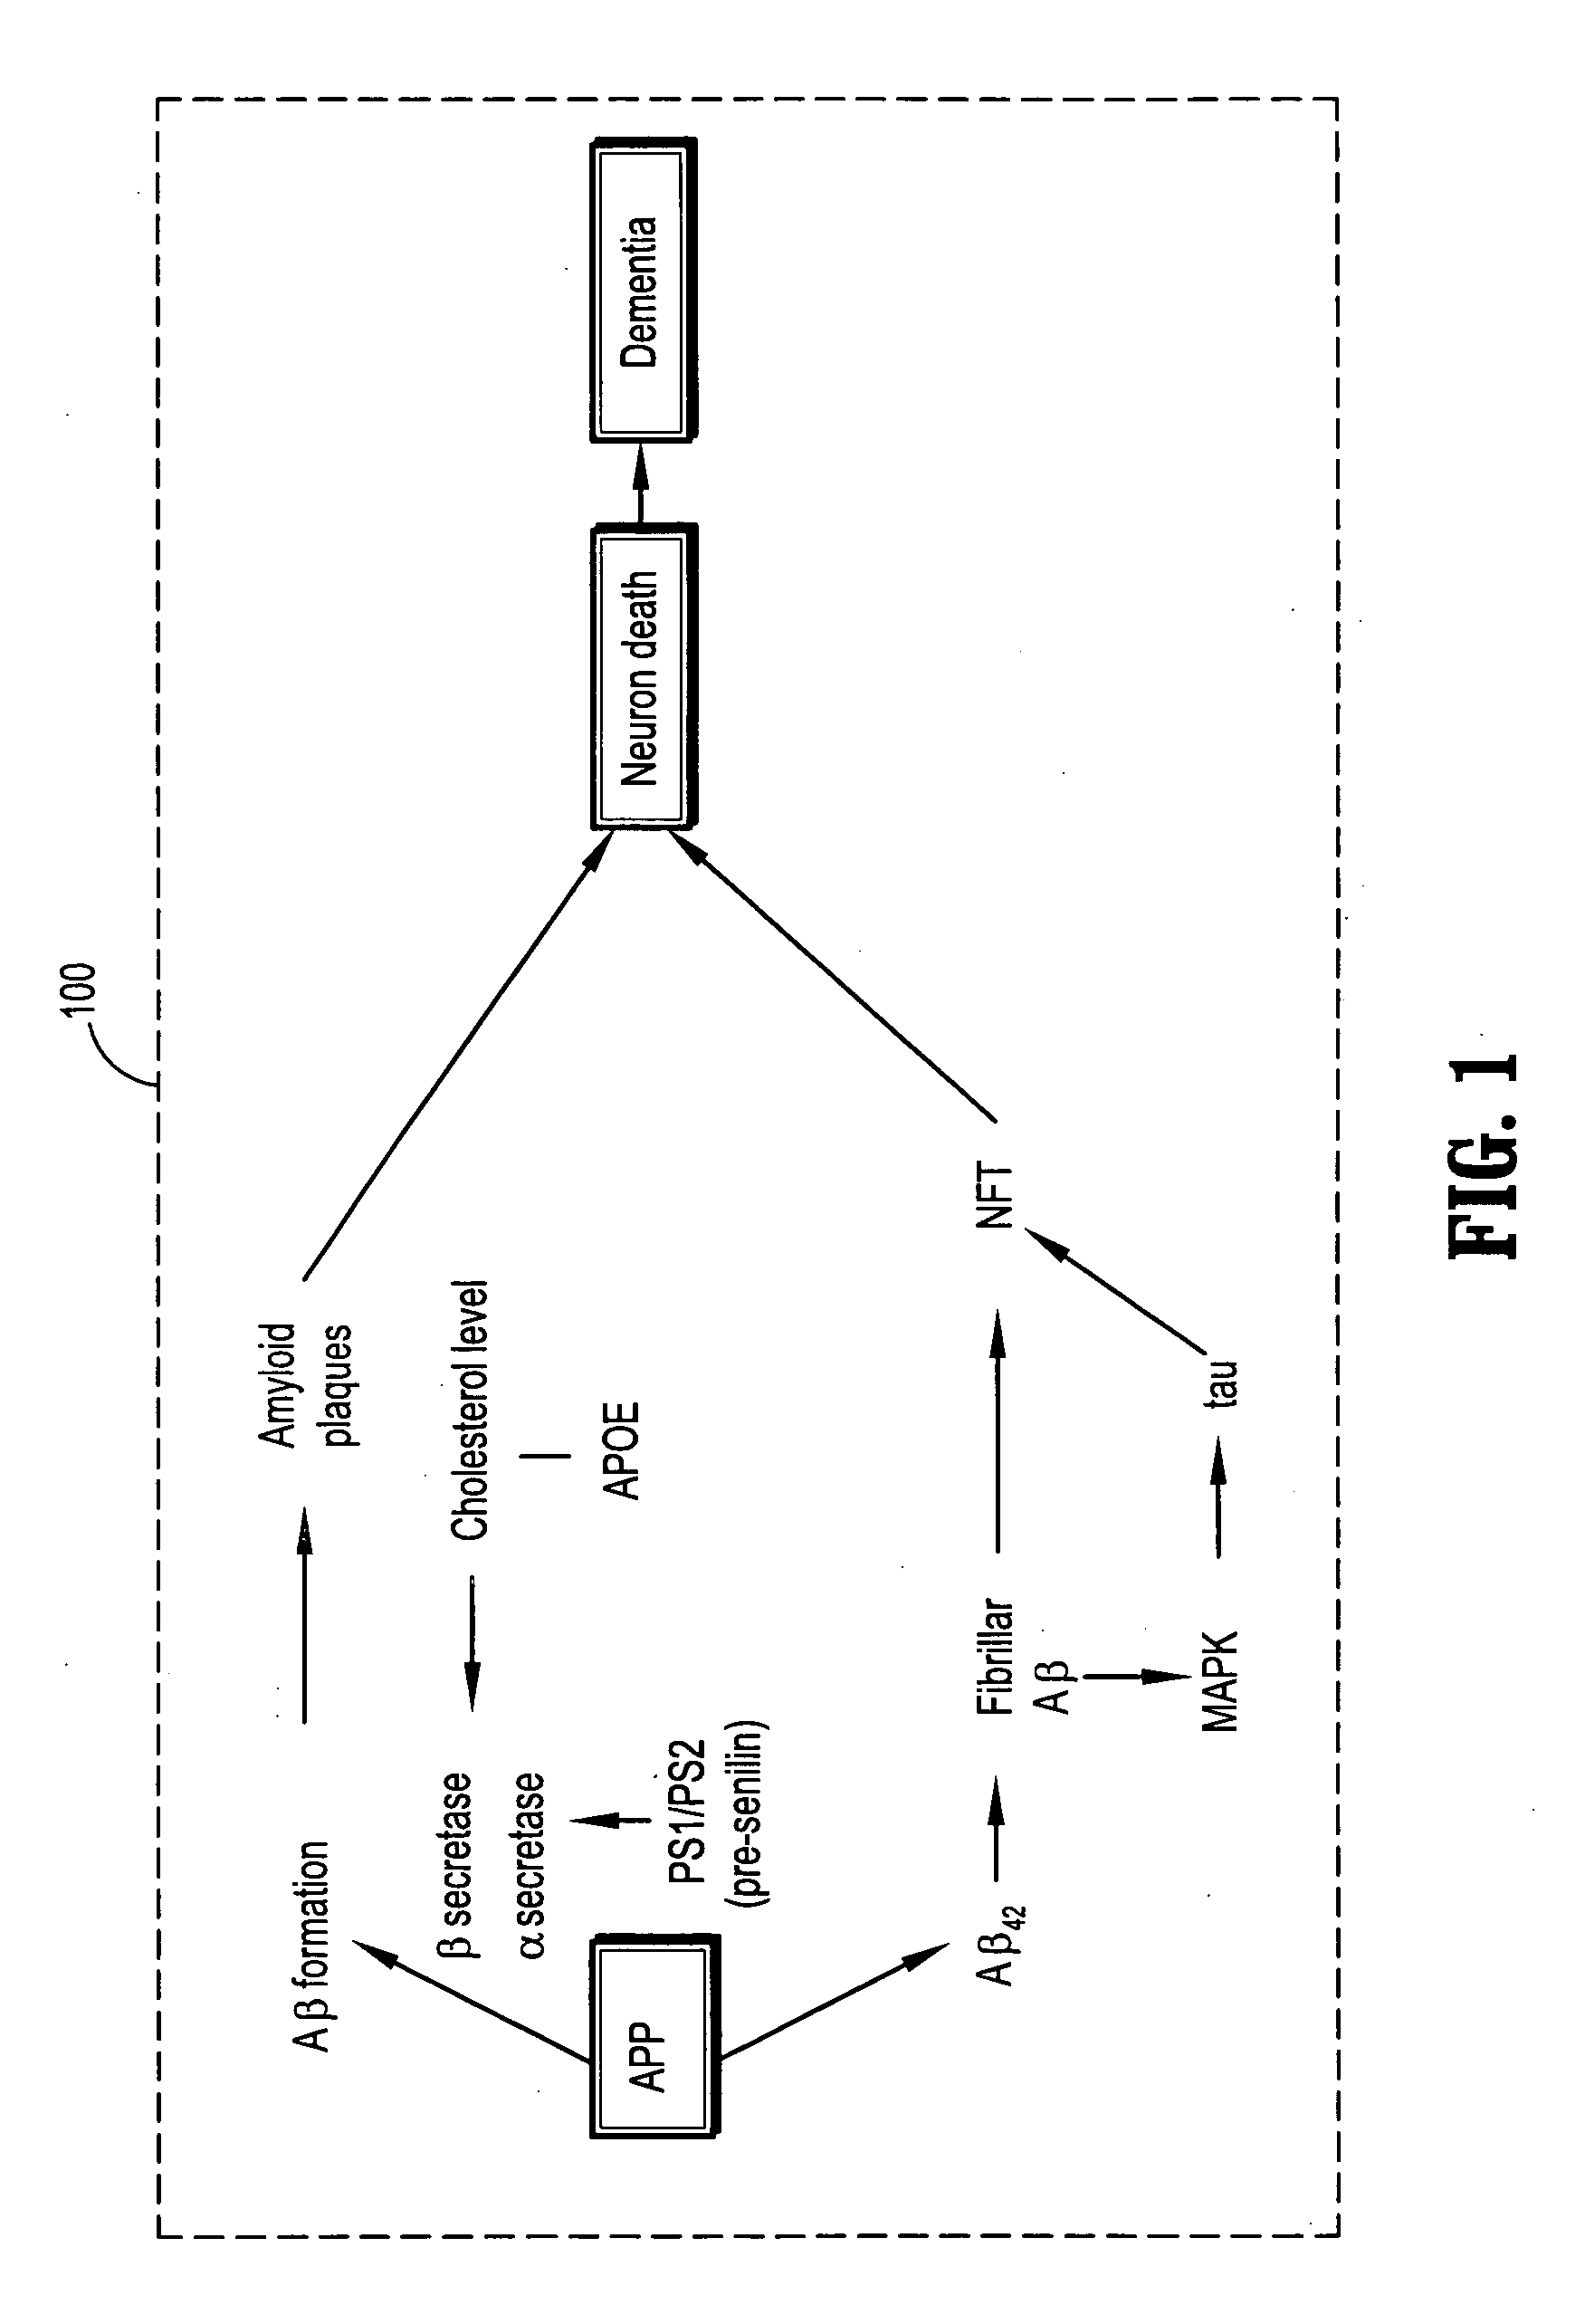 System and method for mild cognitive impairment class discovery using gene expression data